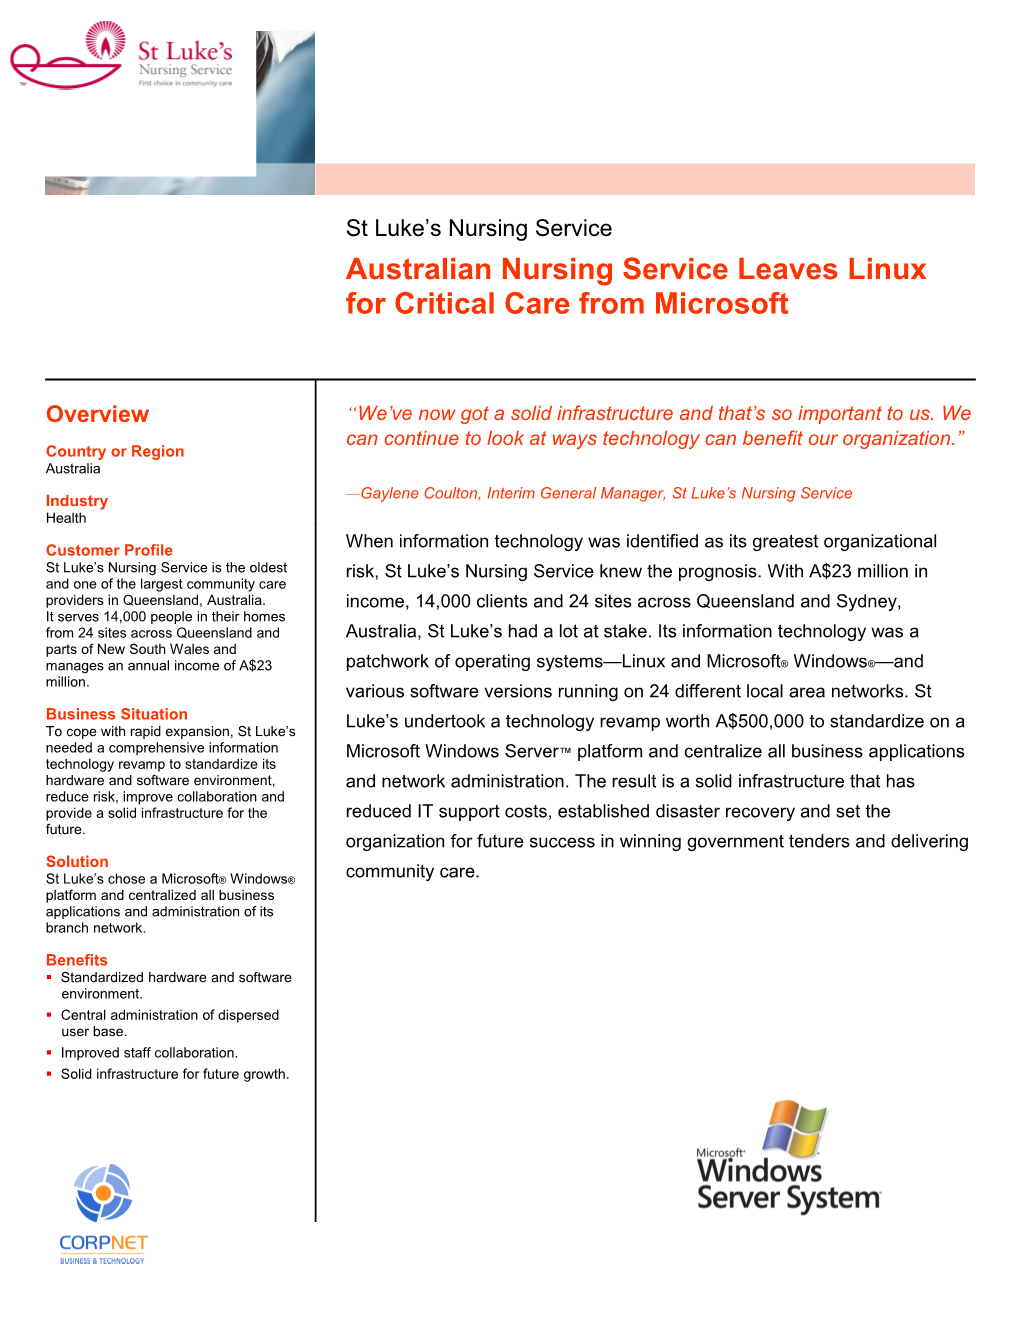 Australian Nursing Service Leaves Linux for Critical Care from Microsoft